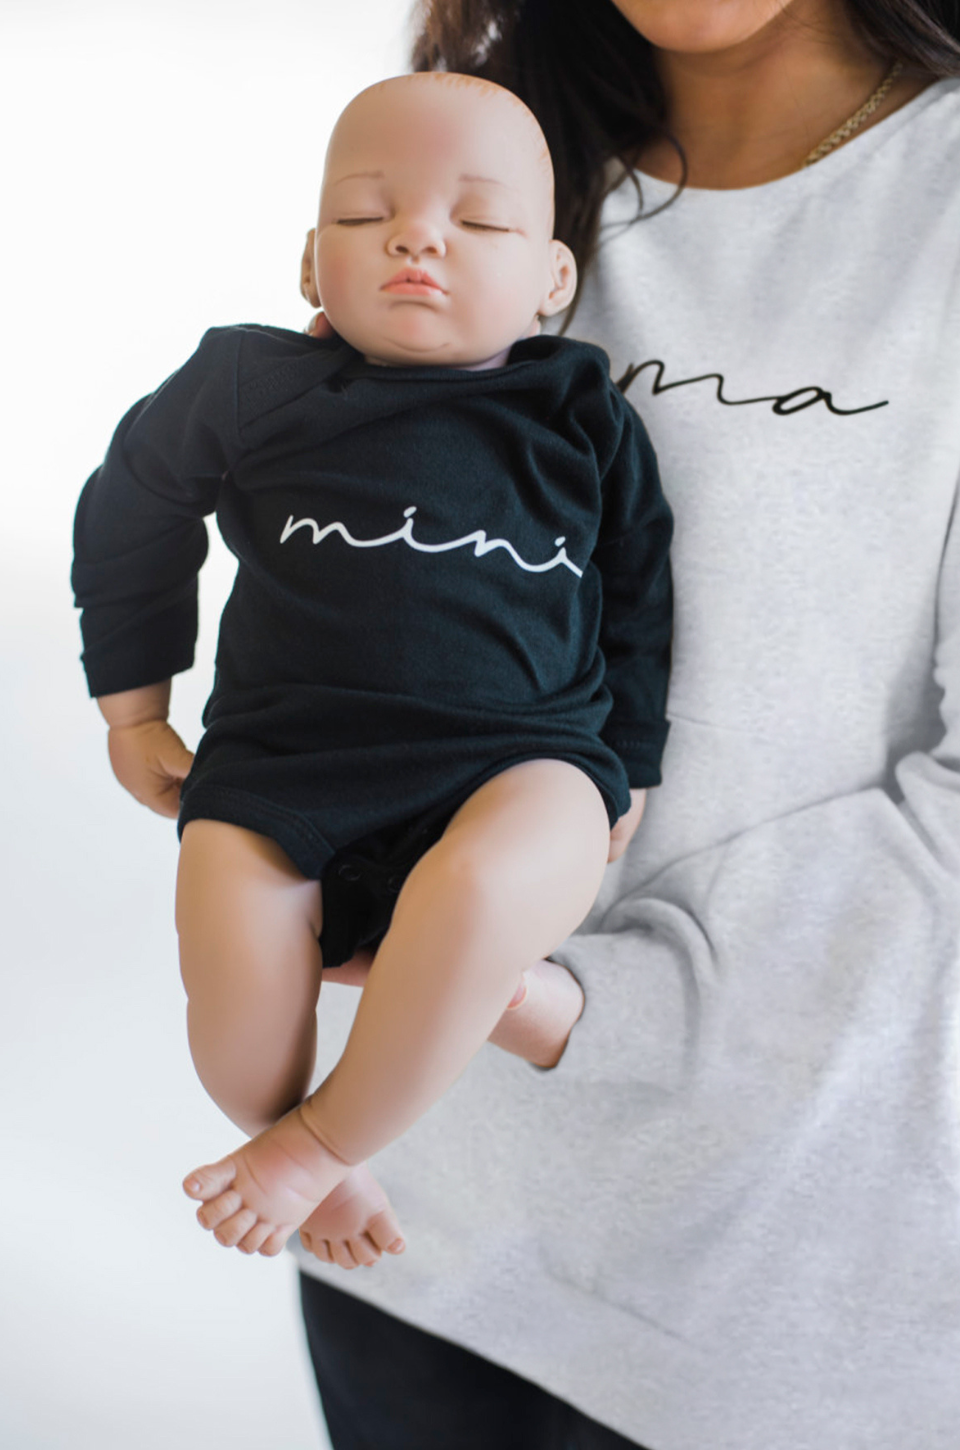 Baby Onsie- In my Mini era – After Sunset